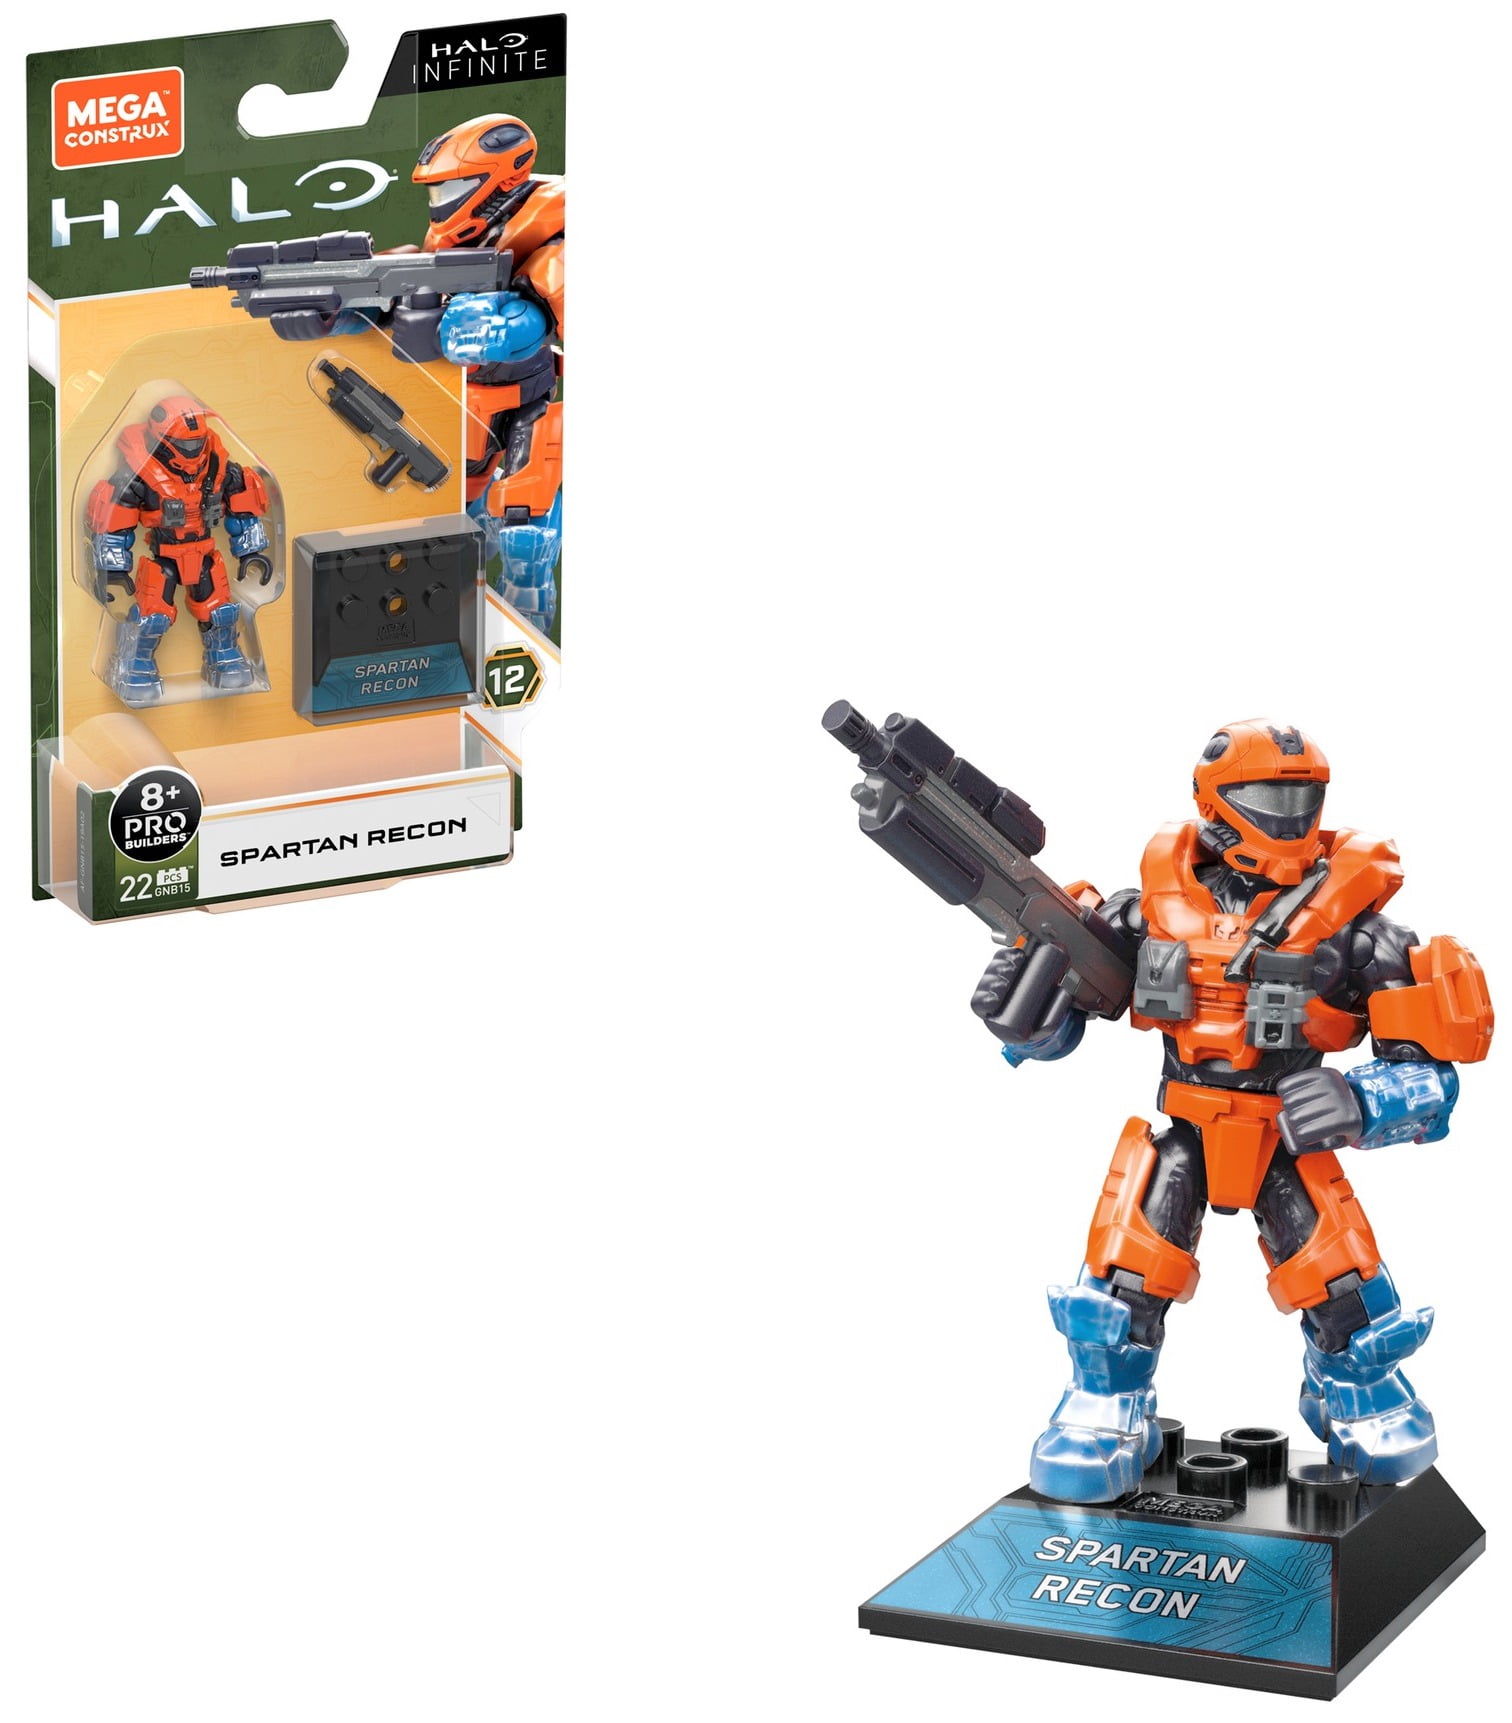 MEGA Construx 2019 Halo Series 11 Master Chief Overshield Figure GLB56 Dkw59 for sale online 